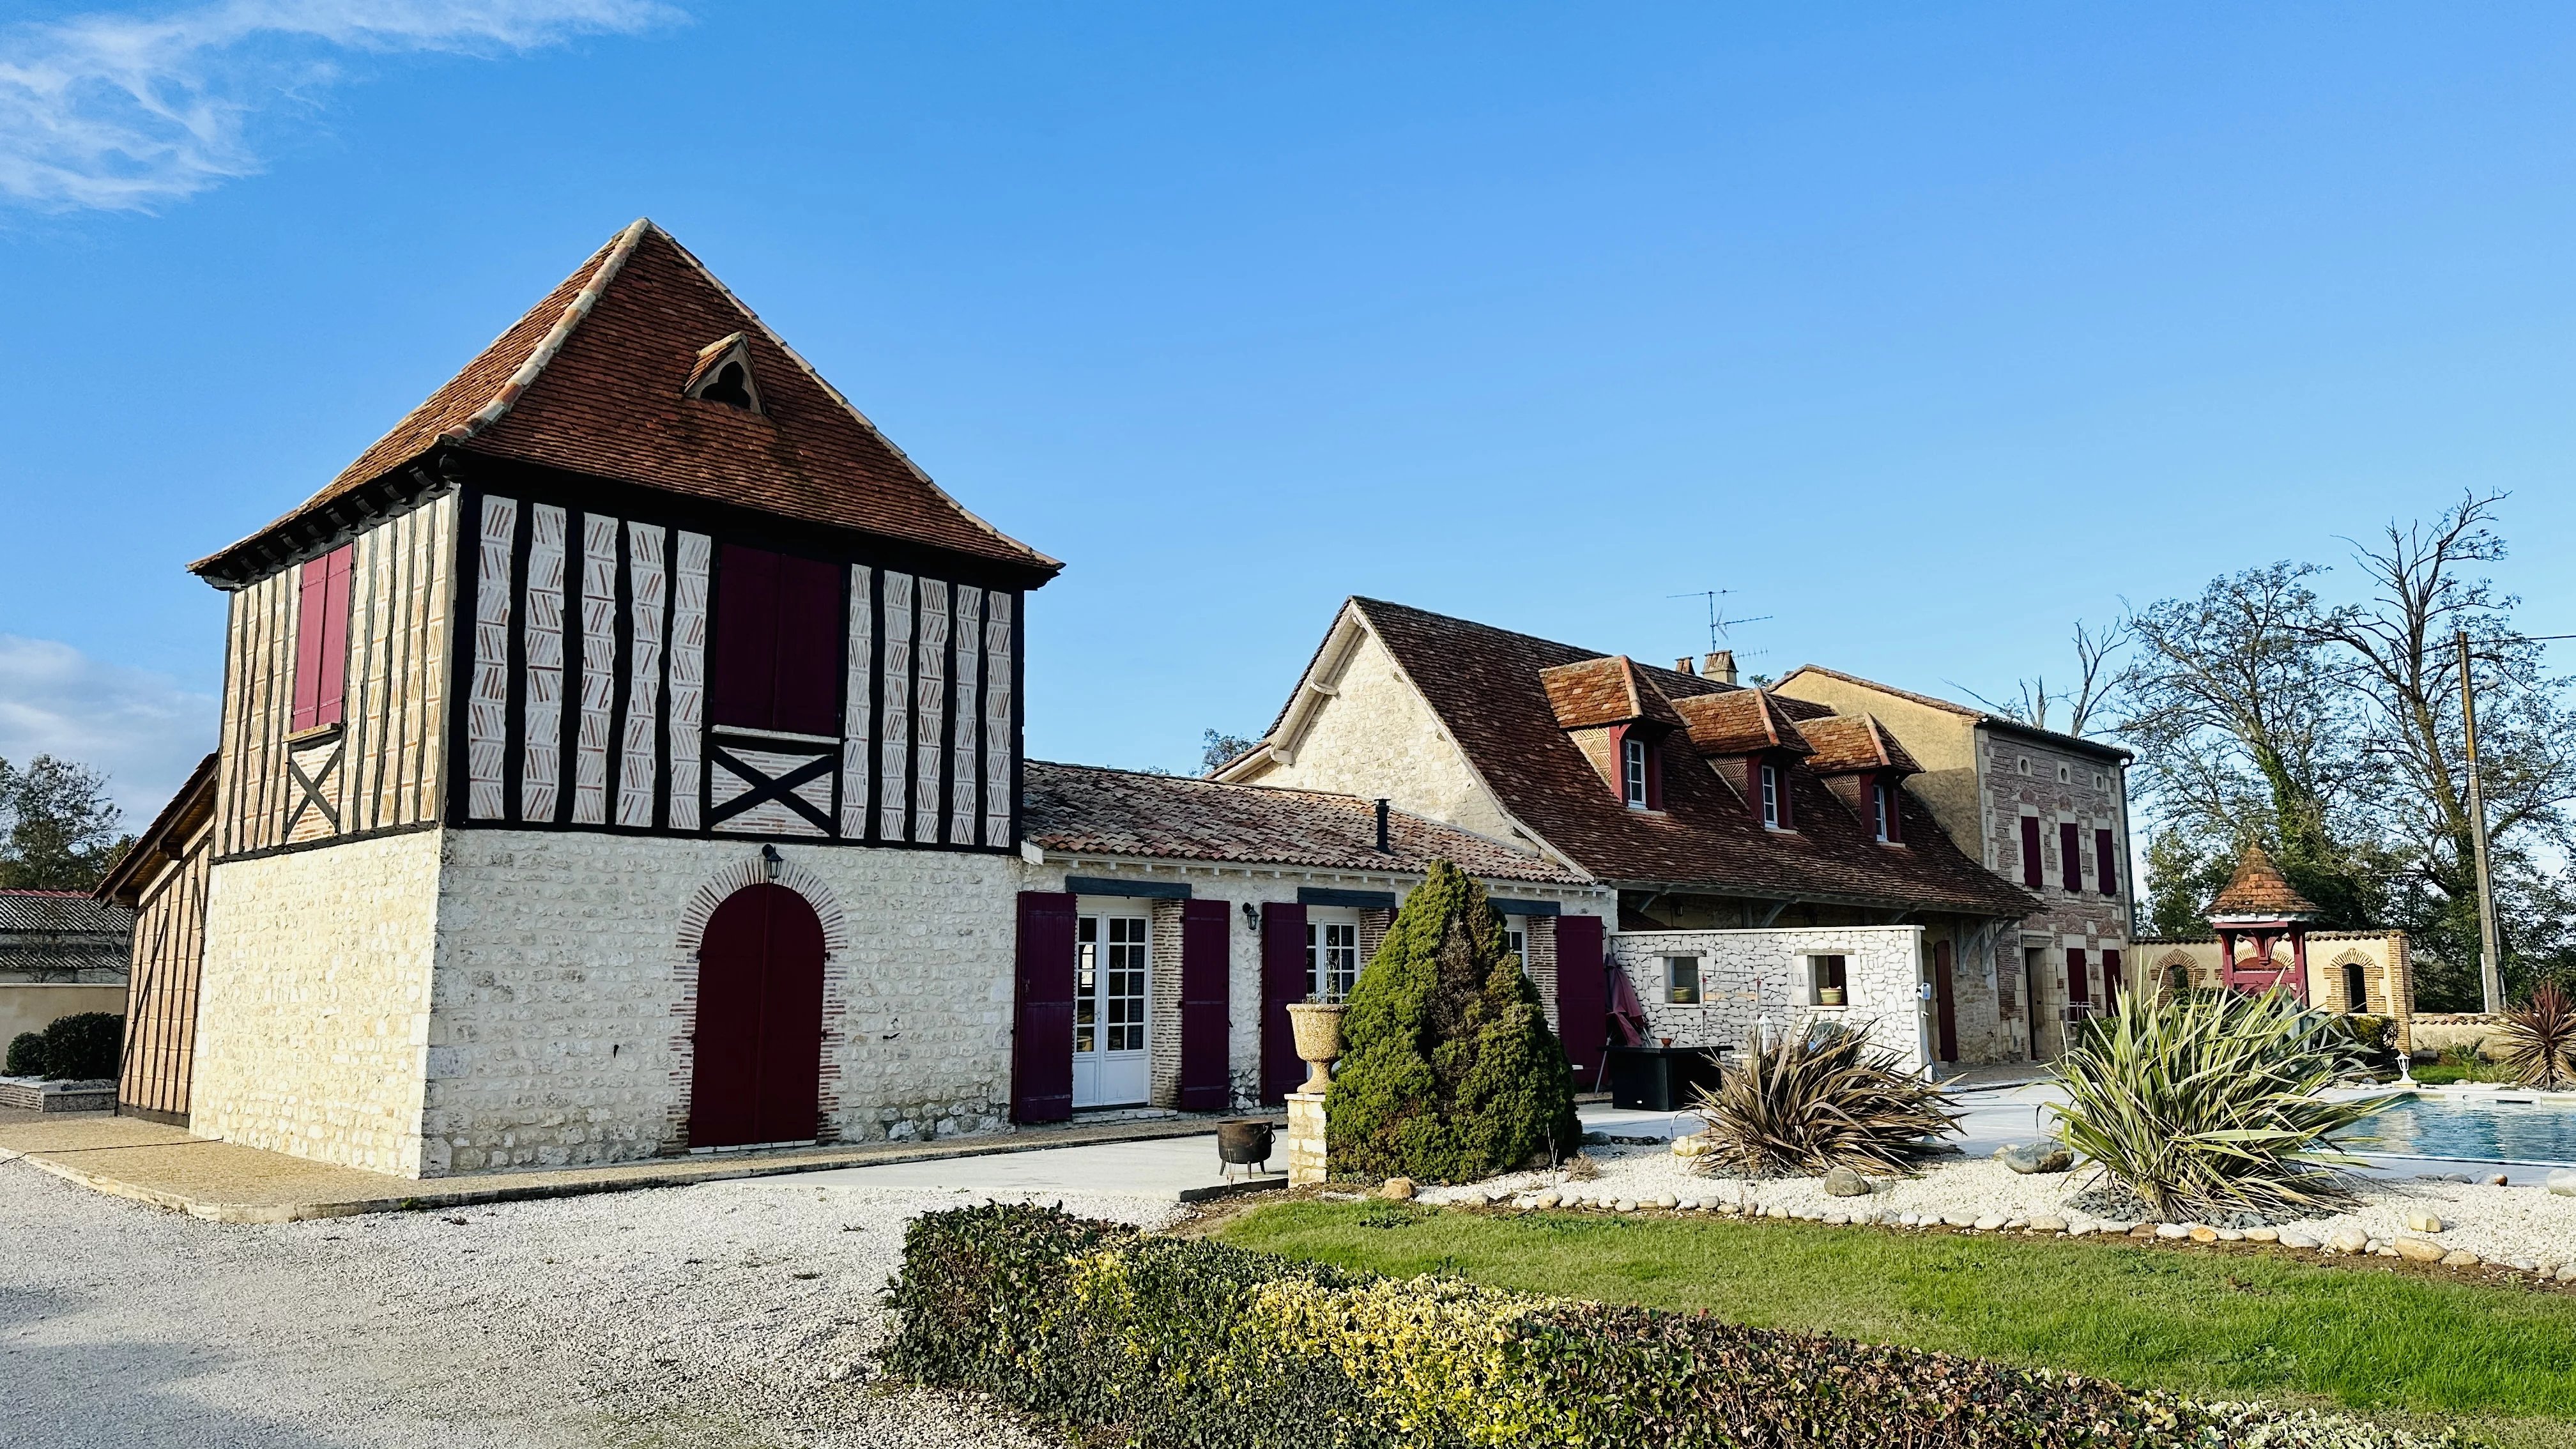 Unique manor house dating back to the 18th Century with guest annexe and 2 gites